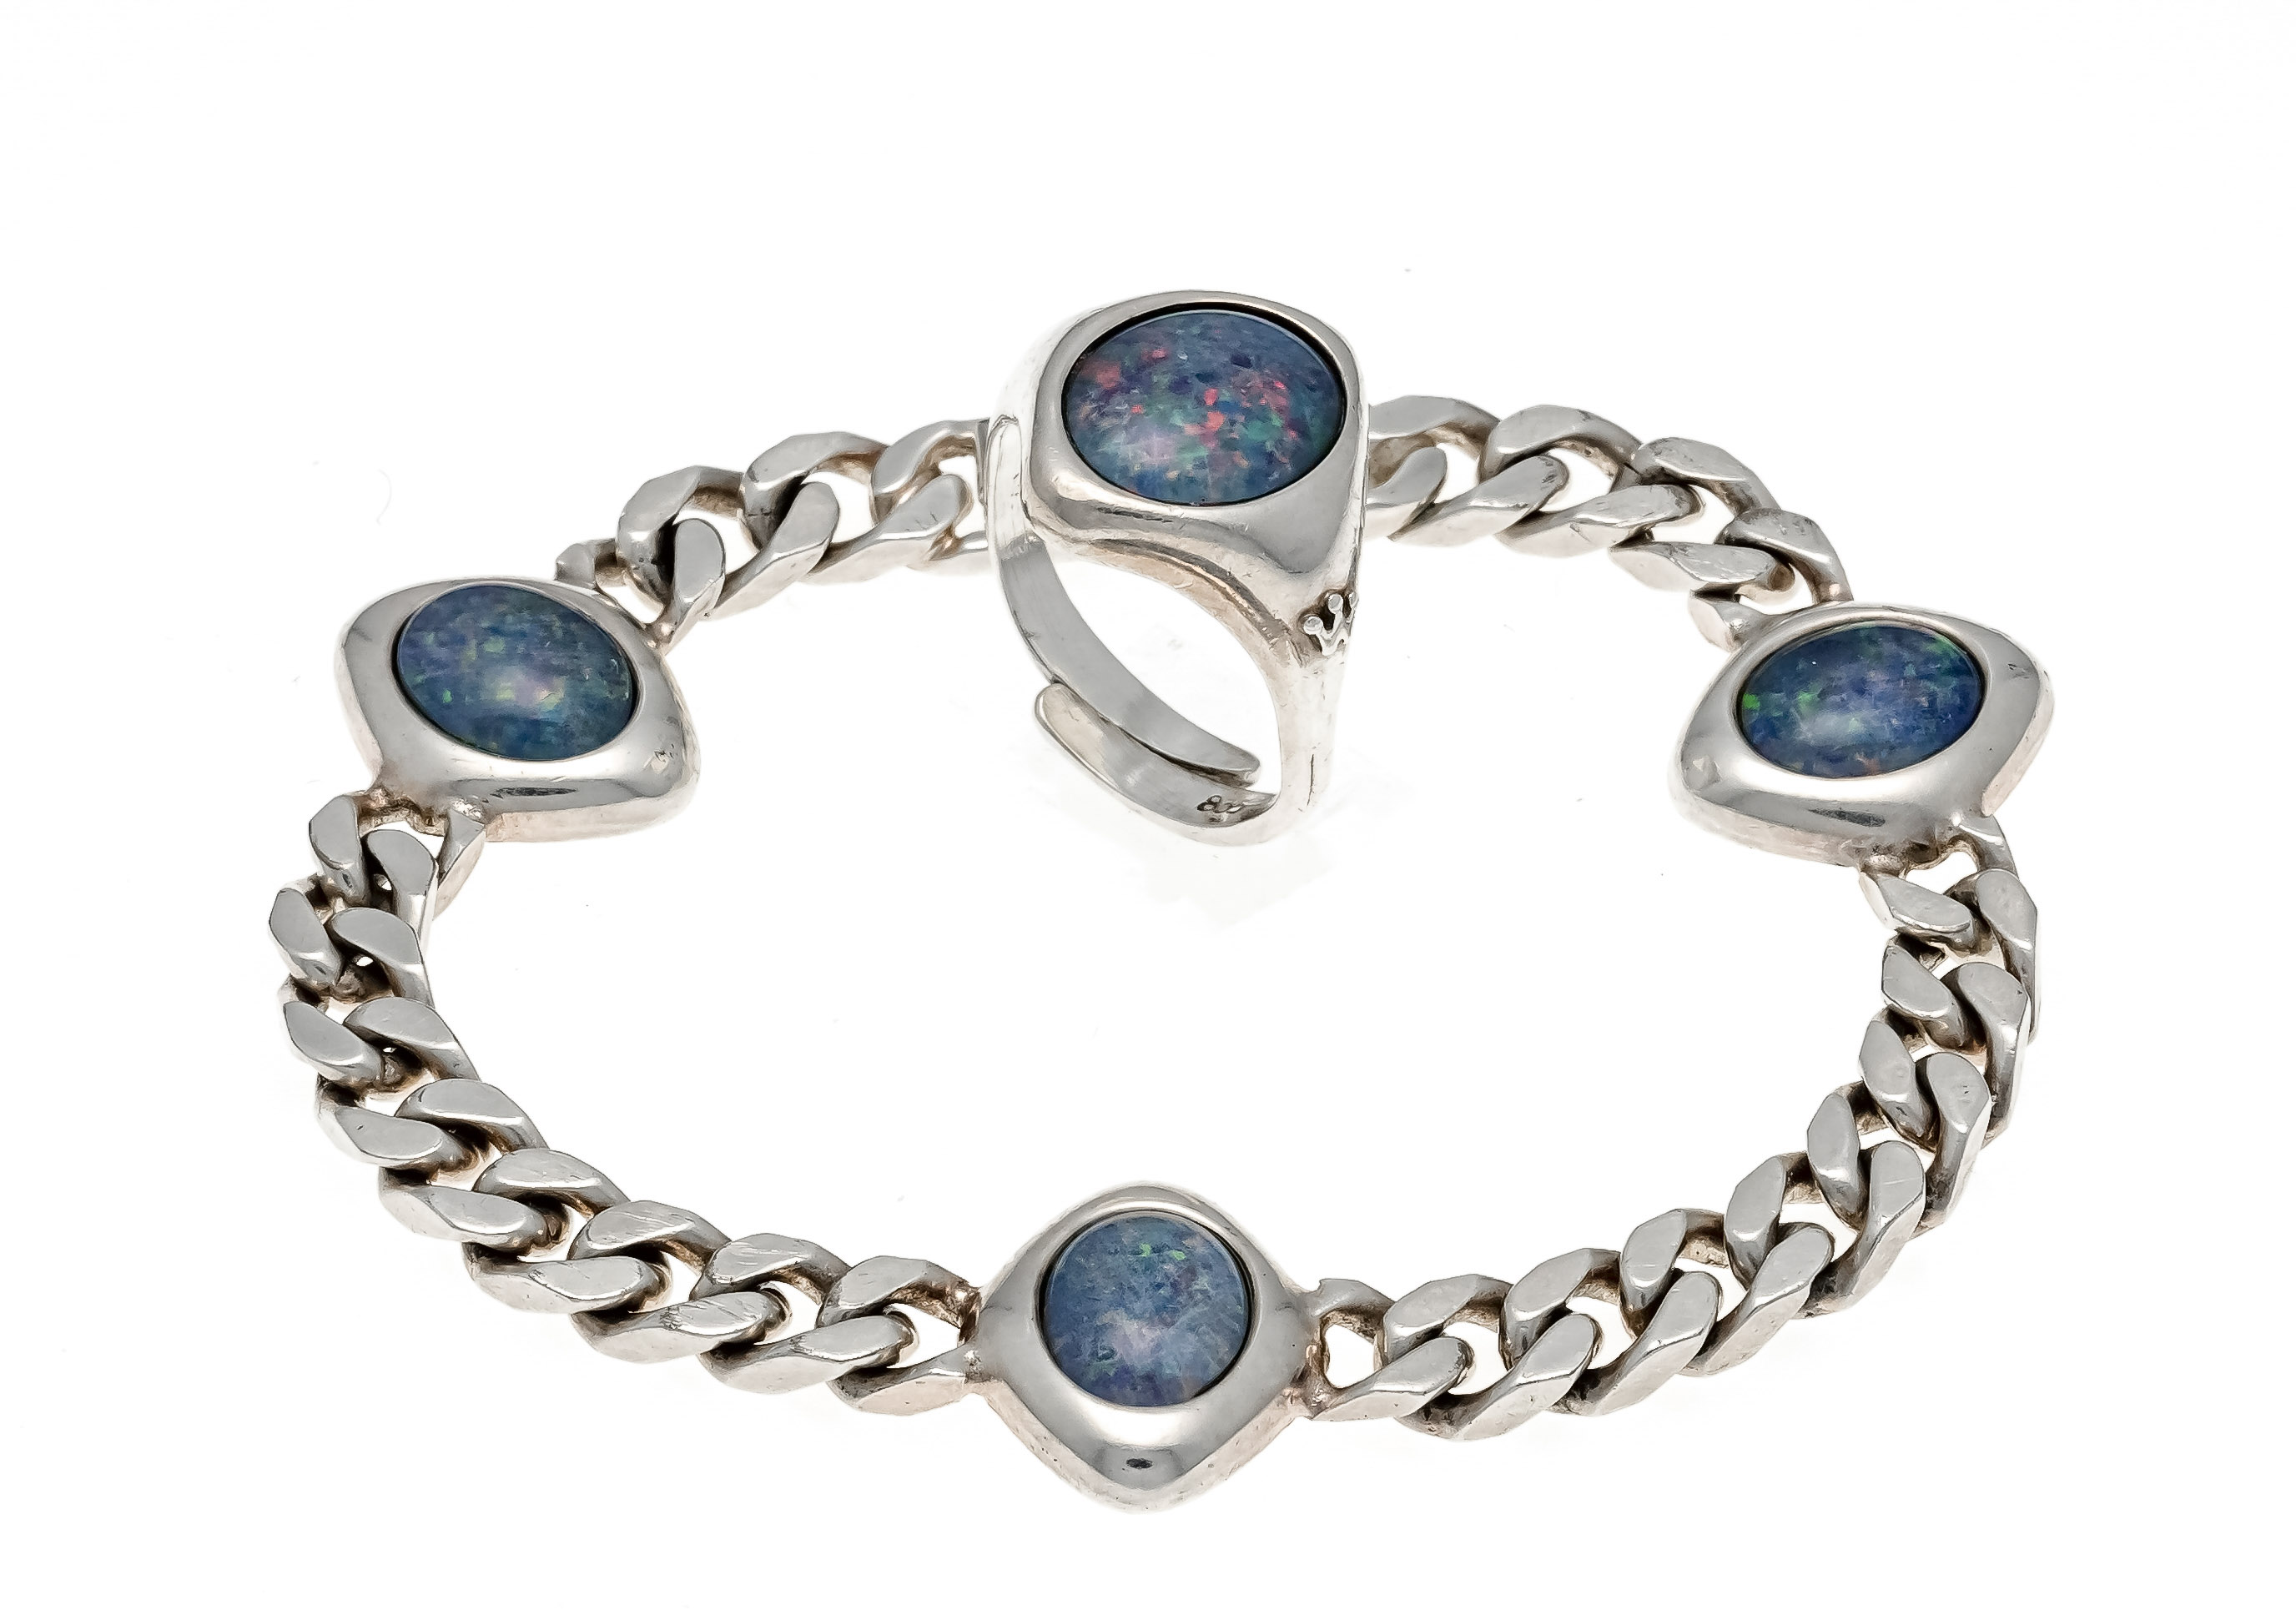 2-piece opal set silver 835/000 with 4 oval opal triplets 10 x 8 mm in blue-green-red play of